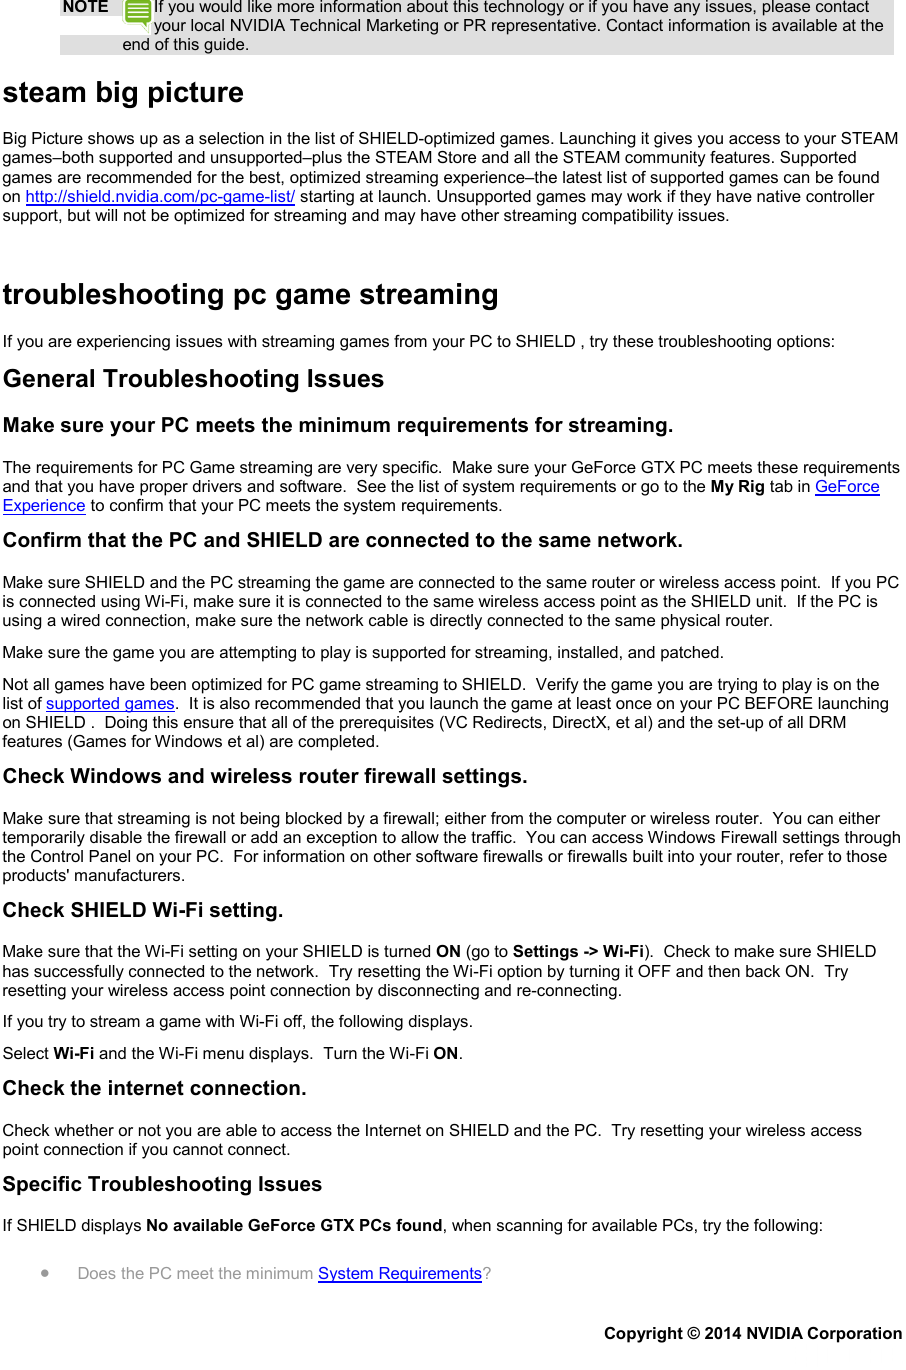 NOTE If you would like more information about this technology or if you have any issues, please contact your local NVIDIA Technical Marketing or PR representative. Contact information is available at the end of this guide. steam big picture Big Picture shows up as a selection in the list of SHIELD-optimized games. Launching it gives you access to your STEAM games–both supported and unsupported–plus the STEAM Store and all the STEAM community features. Supported games are recommended for the best, optimized streaming experience–the latest list of supported games can be found on http://shield.nvidia.com/pc-game-list/ starting at launch. Unsupported games may work if they have native controller support, but will not be optimized for streaming and may have other streaming compatibility issues.   troubleshooting pc game streaming If you are experiencing issues with streaming games from your PC to SHIELD , try these troubleshooting options: General Troubleshooting Issues Make sure your PC meets the minimum requirements for streaming. The requirements for PC Game streaming are very specific.  Make sure your GeForce GTX PC meets these requirements and that you have proper drivers and software.  See the list of system requirements or go to the My Rig tab in GeForce Experience to confirm that your PC meets the system requirements. Confirm that the PC and SHIELD are connected to the same network. Make sure SHIELD and the PC streaming the game are connected to the same router or wireless access point.  If you PC is connected using Wi-Fi, make sure it is connected to the same wireless access point as the SHIELD unit.  If the PC is using a wired connection, make sure the network cable is directly connected to the same physical router. Make sure the game you are attempting to play is supported for streaming, installed, and patched. Not all games have been optimized for PC game streaming to SHIELD.  Verify the game you are trying to play is on the list of supported games.  It is also recommended that you launch the game at least once on your PC BEFORE launching on SHIELD .  Doing this ensure that all of the prerequisites (VC Redirects, DirectX, et al) and the set-up of all DRM features (Games for Windows et al) are completed. Check Windows and wireless router firewall settings. Make sure that streaming is not being blocked by a firewall; either from the computer or wireless router.  You can either temporarily disable the firewall or add an exception to allow the traffic.  You can access Windows Firewall settings through the Control Panel on your PC.  For information on other software firewalls or firewalls built into your router, refer to those products&apos; manufacturers. Check SHIELD Wi-Fi setting. Make sure that the Wi-Fi setting on your SHIELD is turned ON (go to Settings -&gt; Wi-Fi).  Check to make sure SHIELD has successfully connected to the network.  Try resetting the Wi-Fi option by turning it OFF and then back ON.  Try resetting your wireless access point connection by disconnecting and re-connecting. If you try to stream a game with Wi-Fi off, the following displays. Select Wi-Fi and the Wi-Fi menu displays.  Turn the Wi-Fi ON. Check the internet connection. Check whether or not you are able to access the Internet on SHIELD and the PC.  Try resetting your wireless access point connection if you cannot connect. Specific Troubleshooting Issues If SHIELD displays No available GeForce GTX PCs found, when scanning for available PCs, try the following: • Does the PC meet the minimum System Requirements? Copyright © 2014 NVIDIA Corporation   